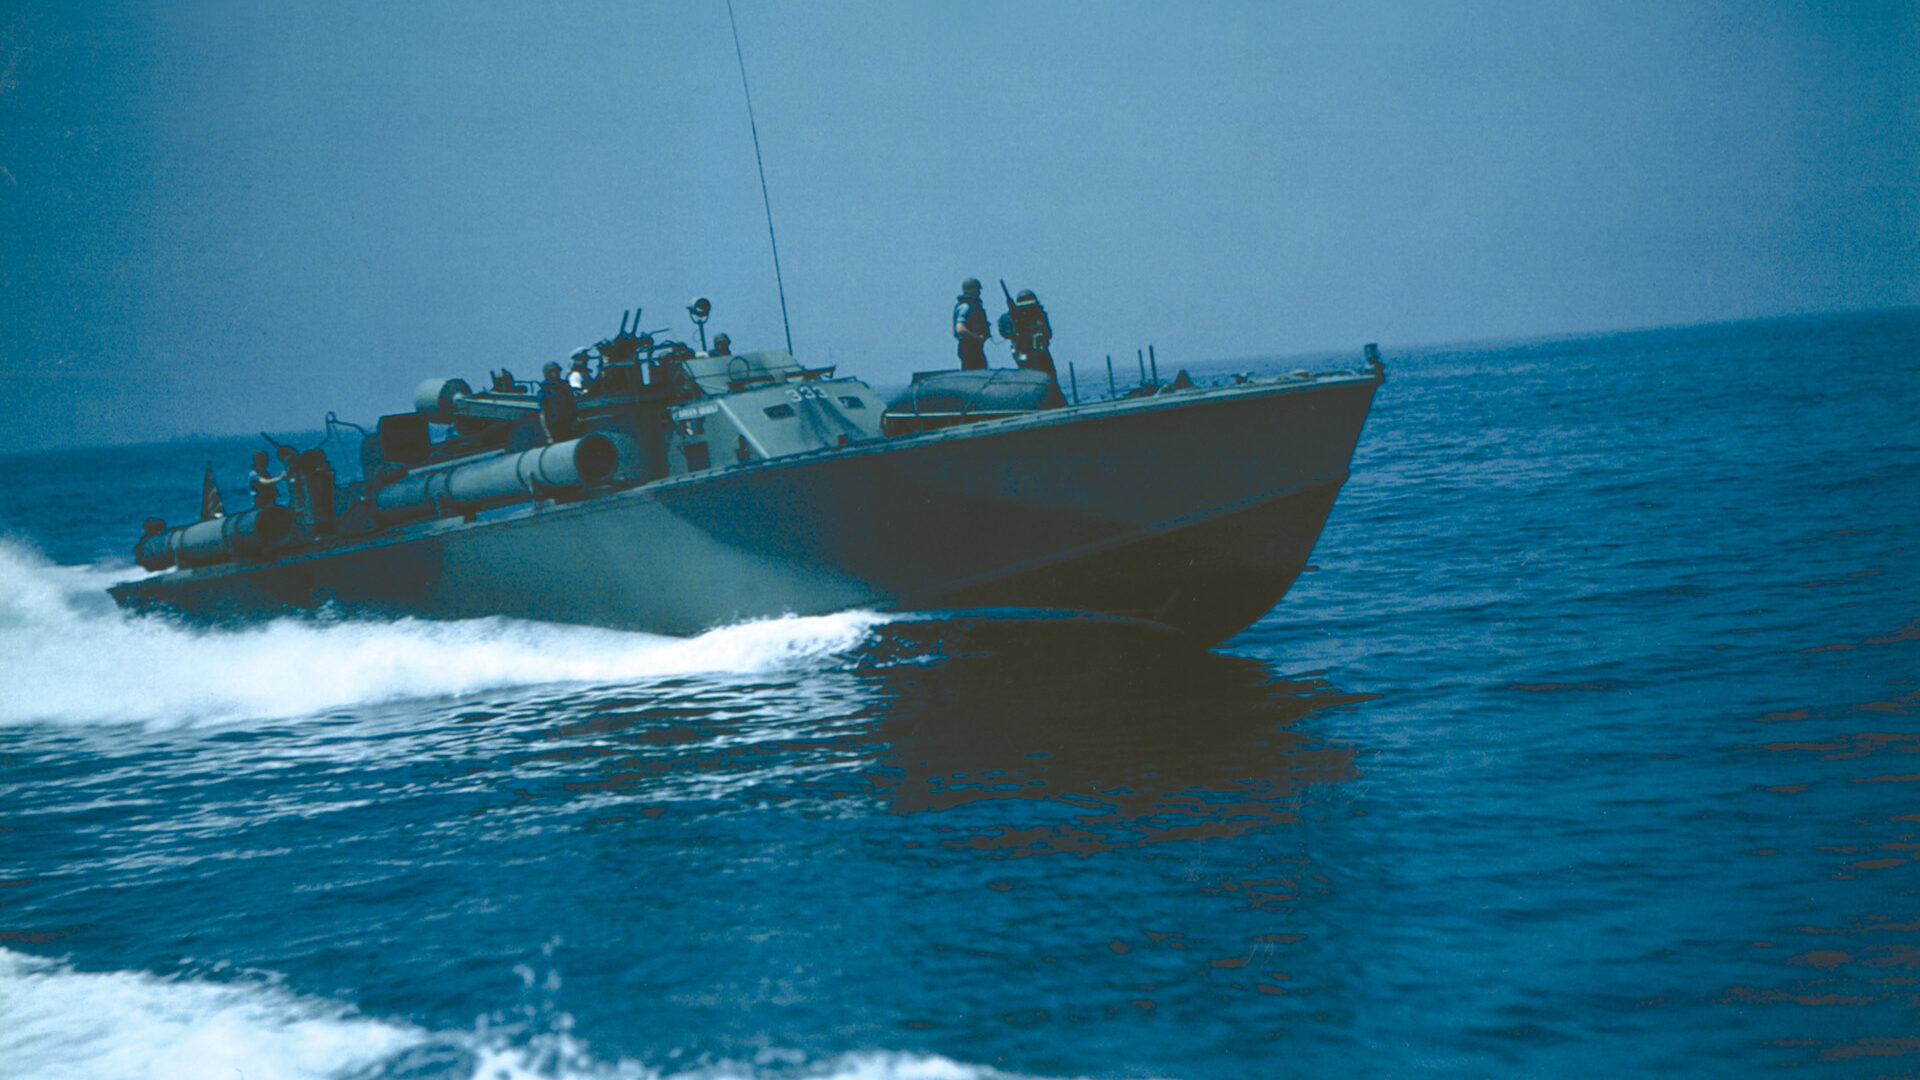 During the daring mission to evacuate General Douglas MacArthur from the Philippines, a PT boat slices through the Pacific Ocean at high speed.